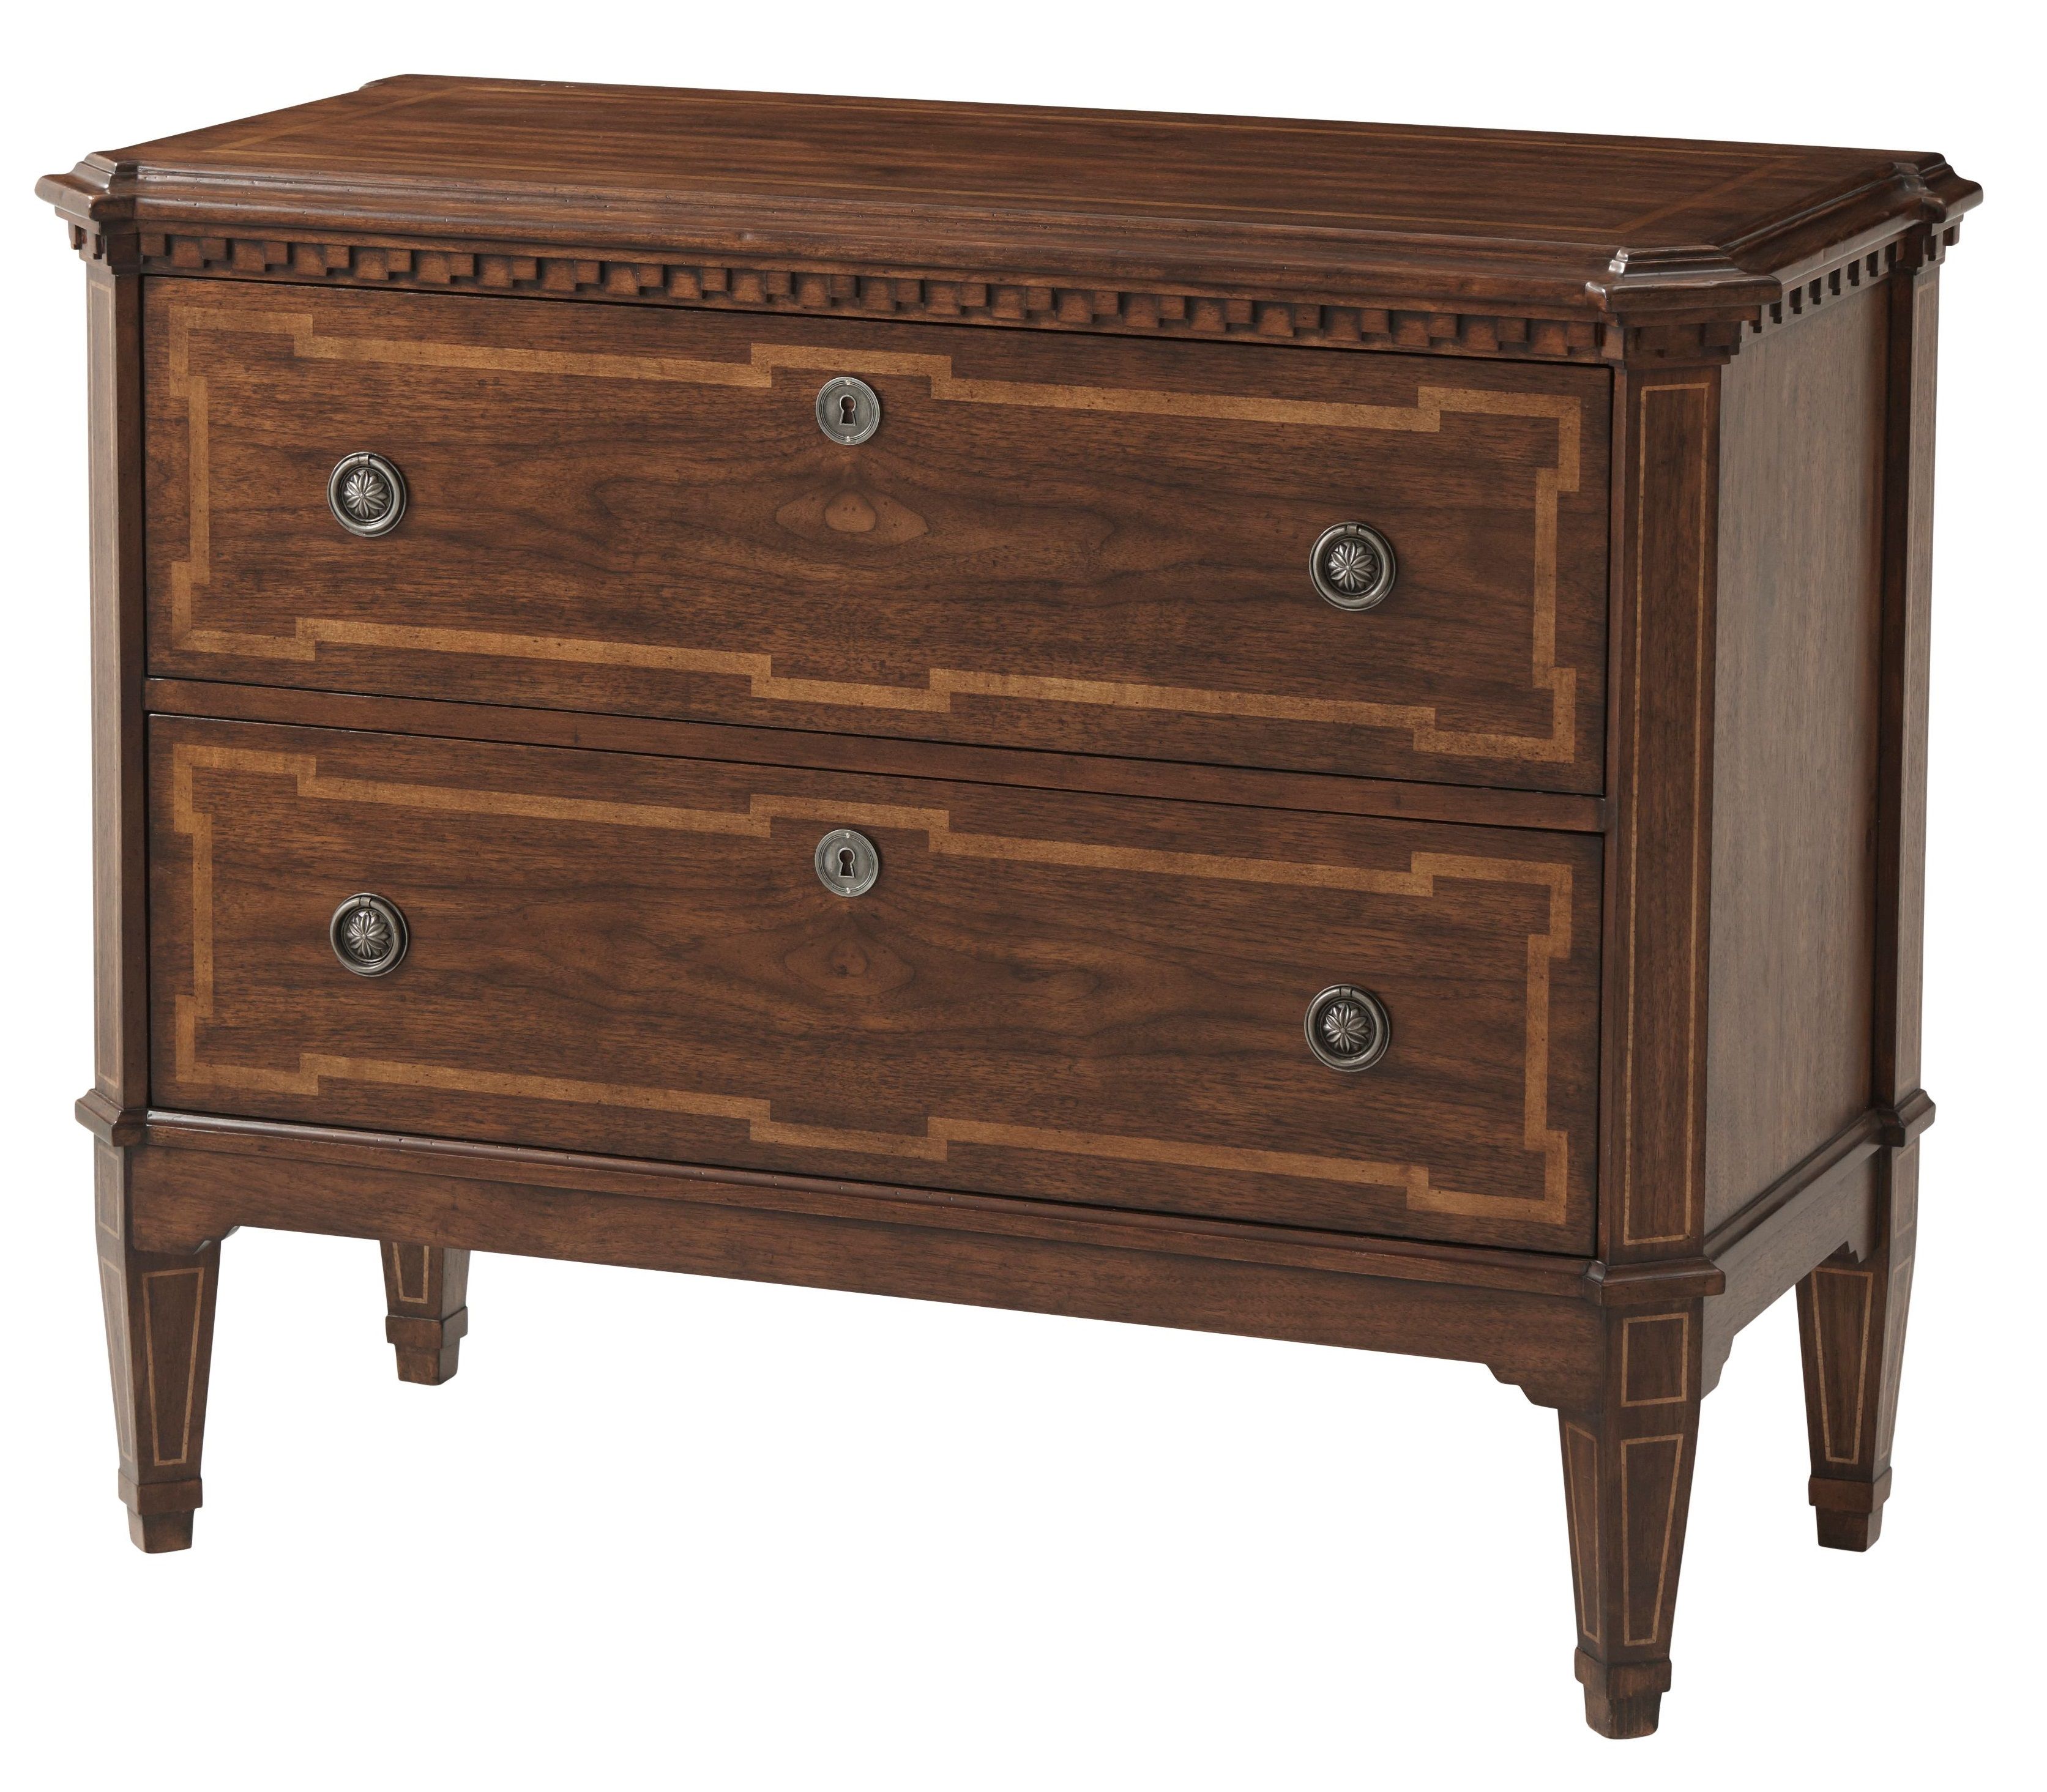 Beech veneer top with canted corners, dental molded frieze, two long drawers, pewter handles, and spade legs.